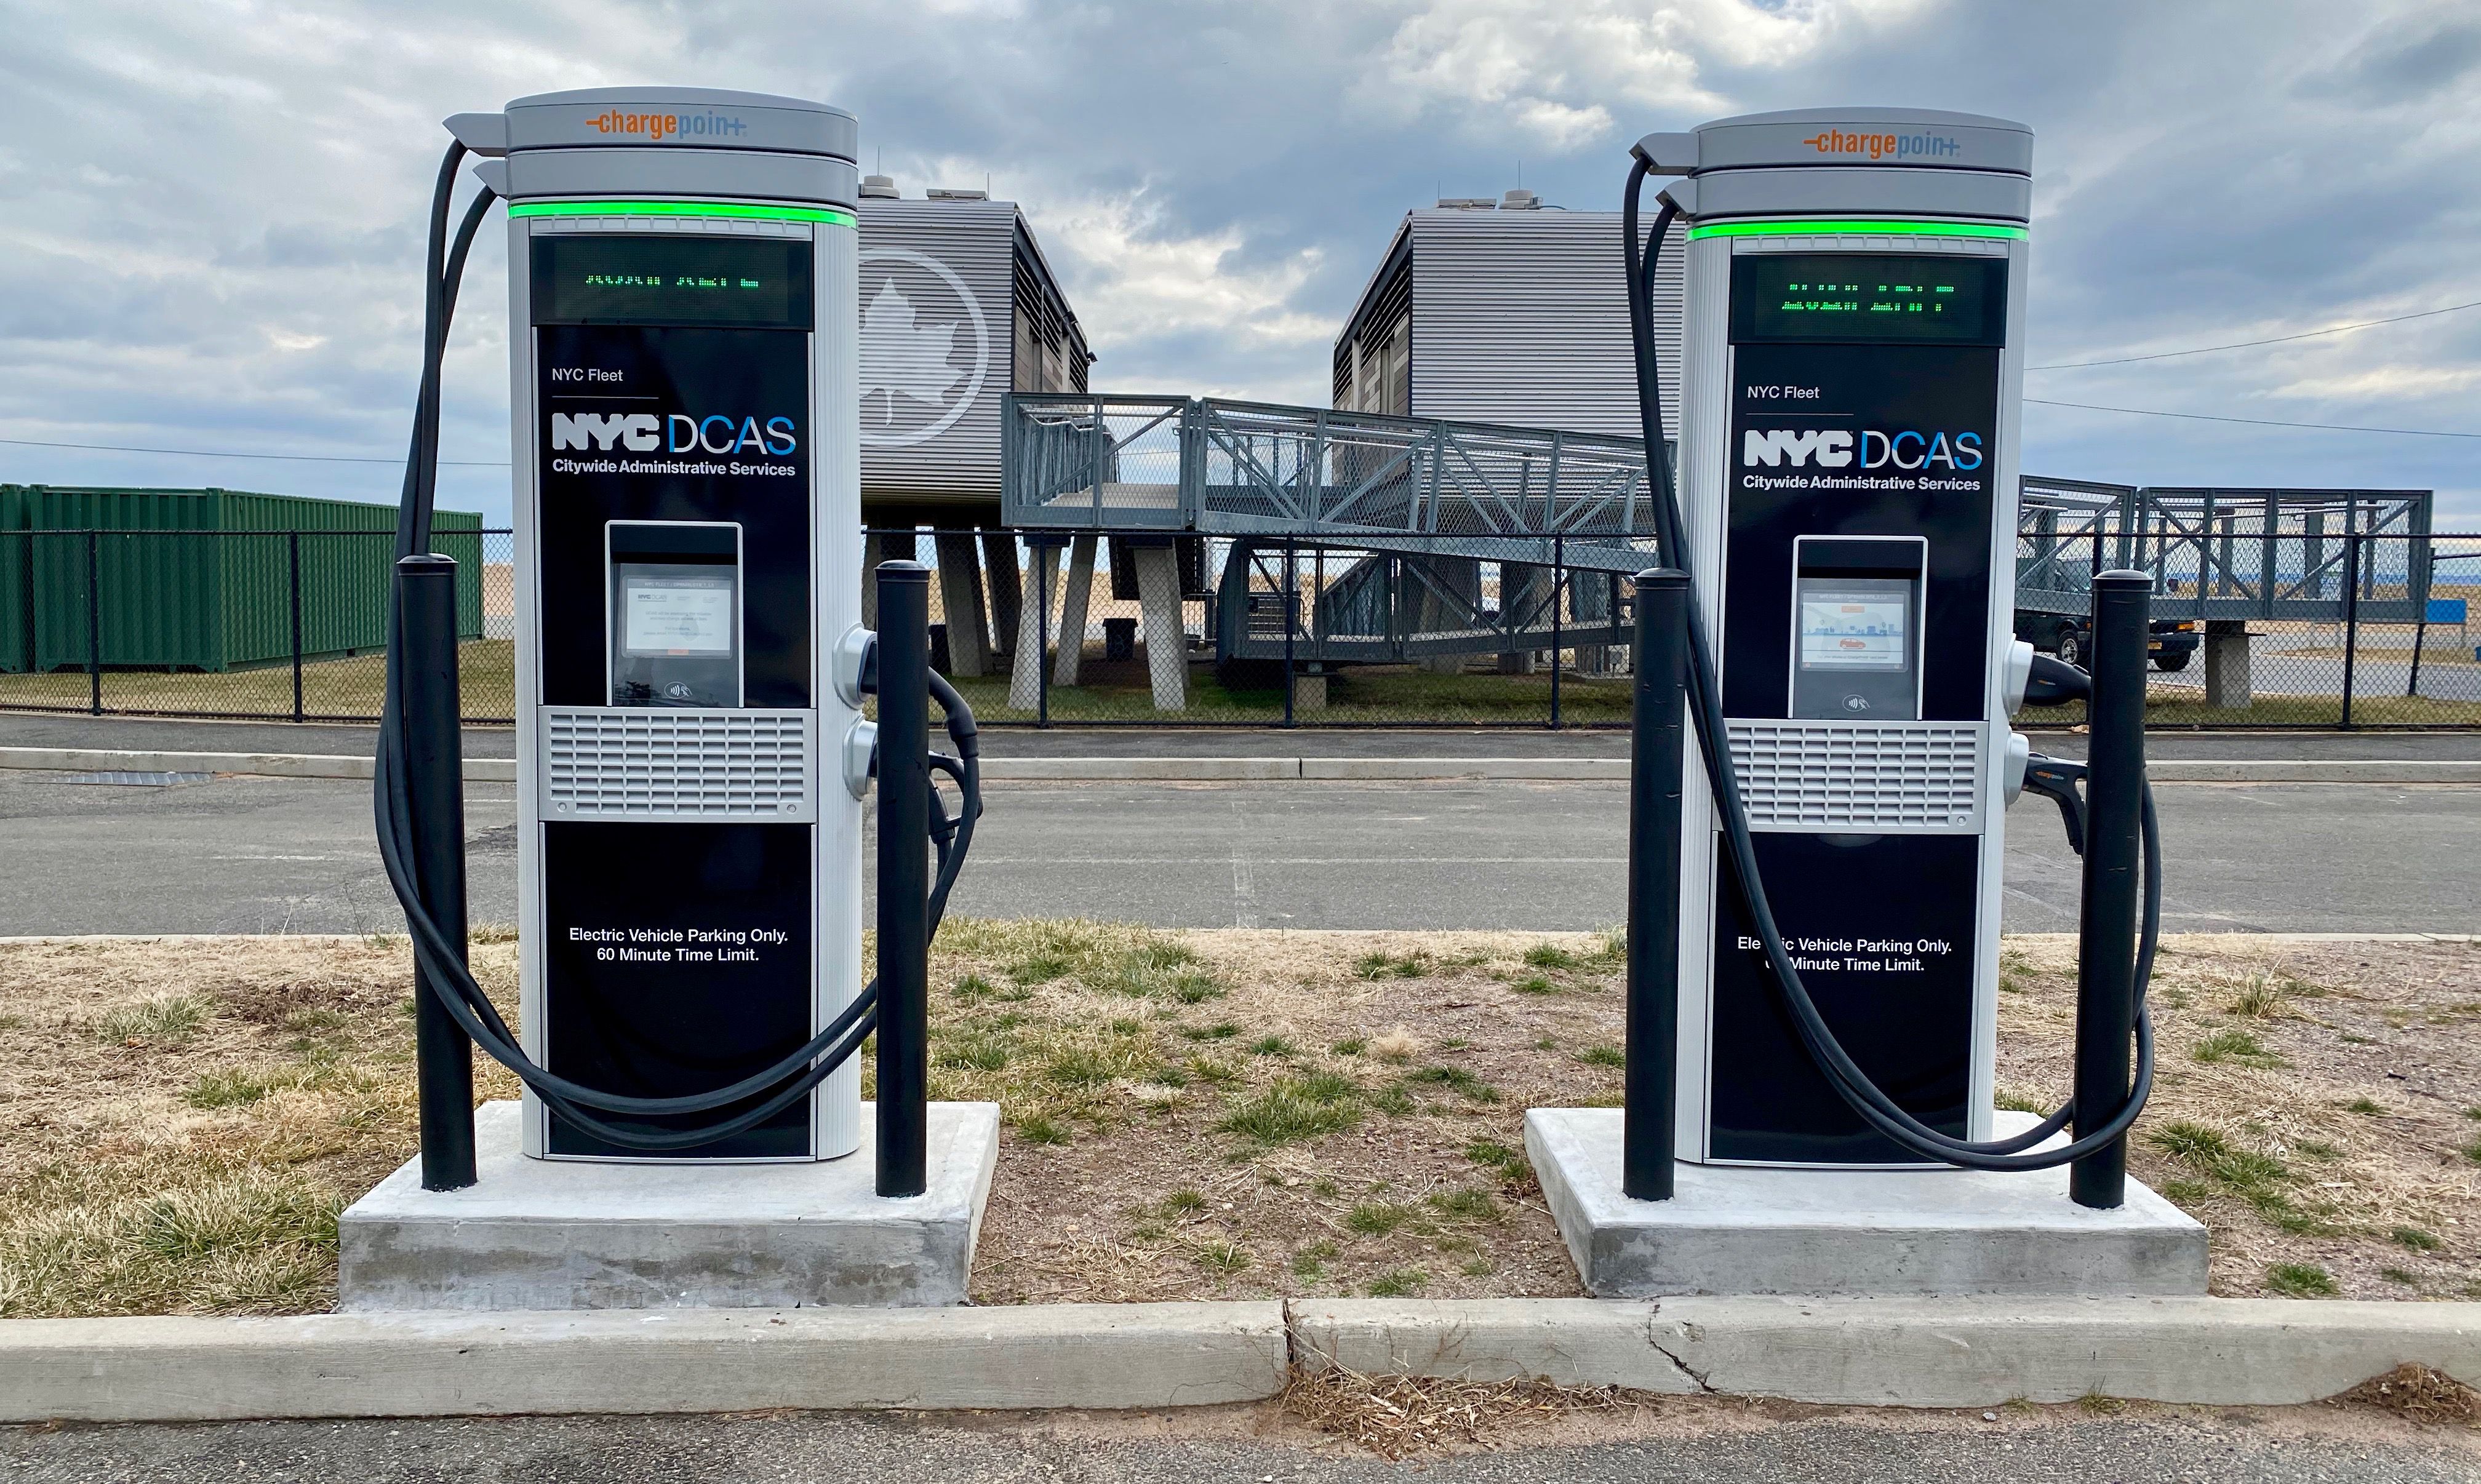 Public electric vehicle charging stations installed on Staten Island 